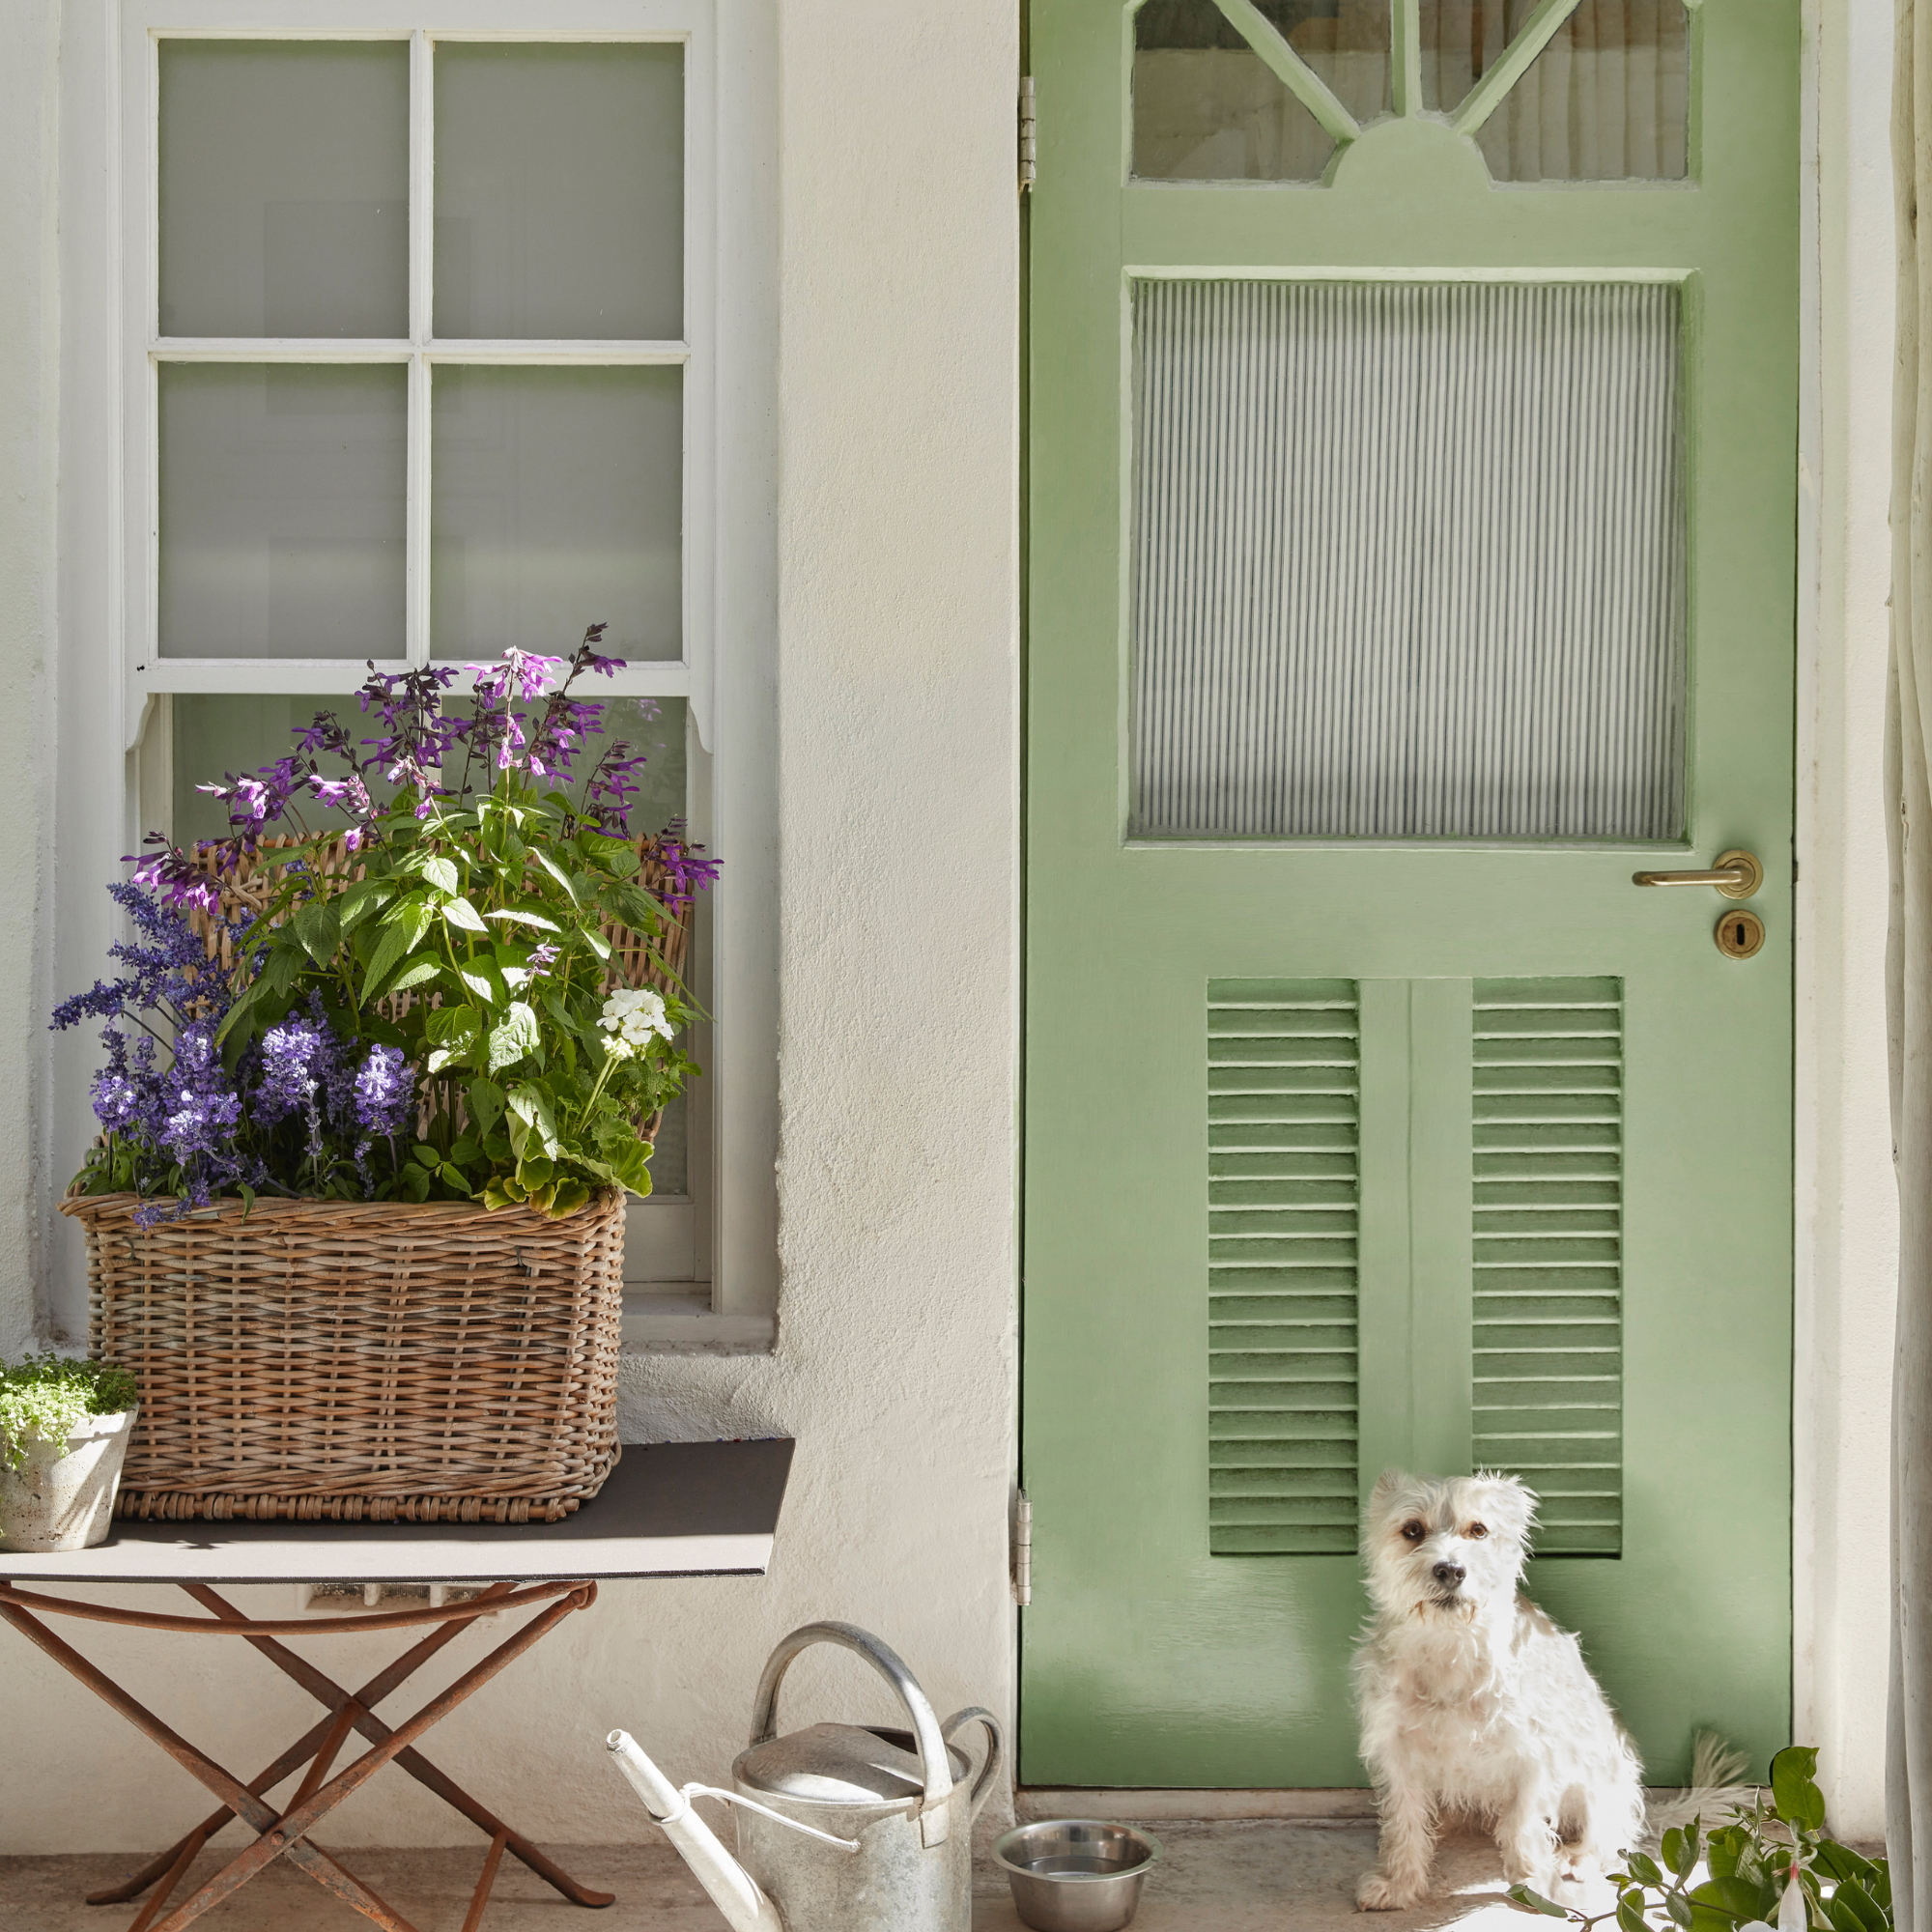 Cottage style exterior with pastel green front door, vintage table with basket planter, watering can, small dog